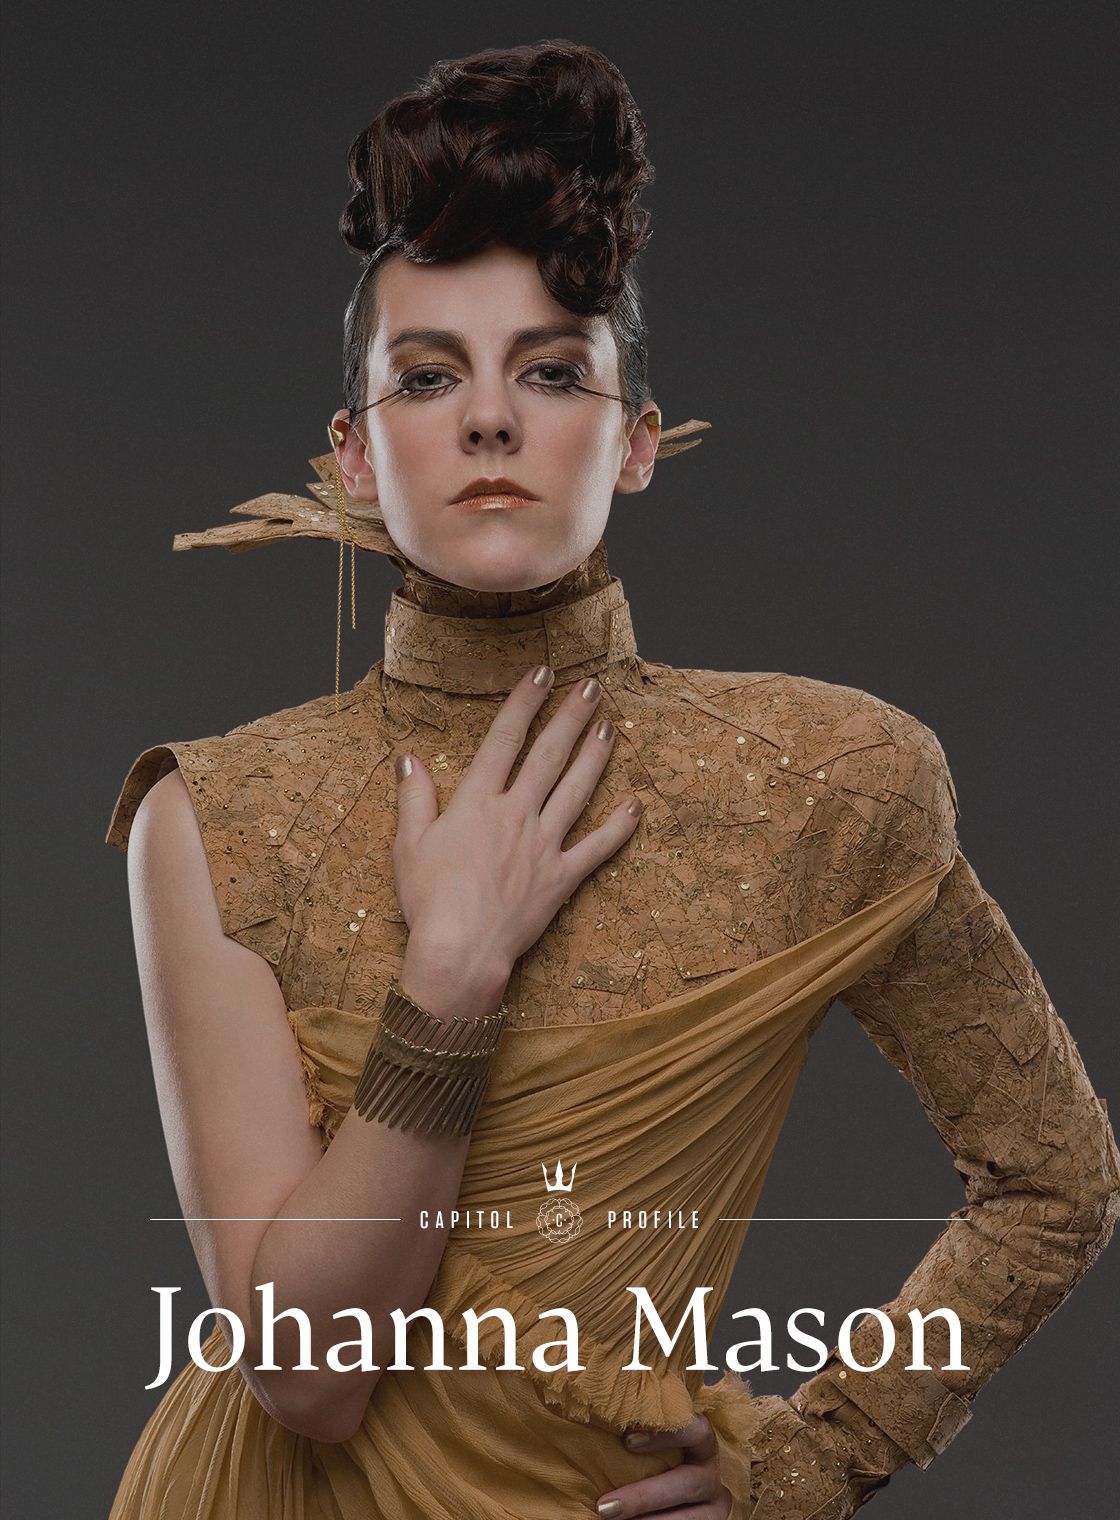 THE HUNGER GAMES: CATCHING FIRE Brings Capitol Couture to Jena Malone's Johanna Mason